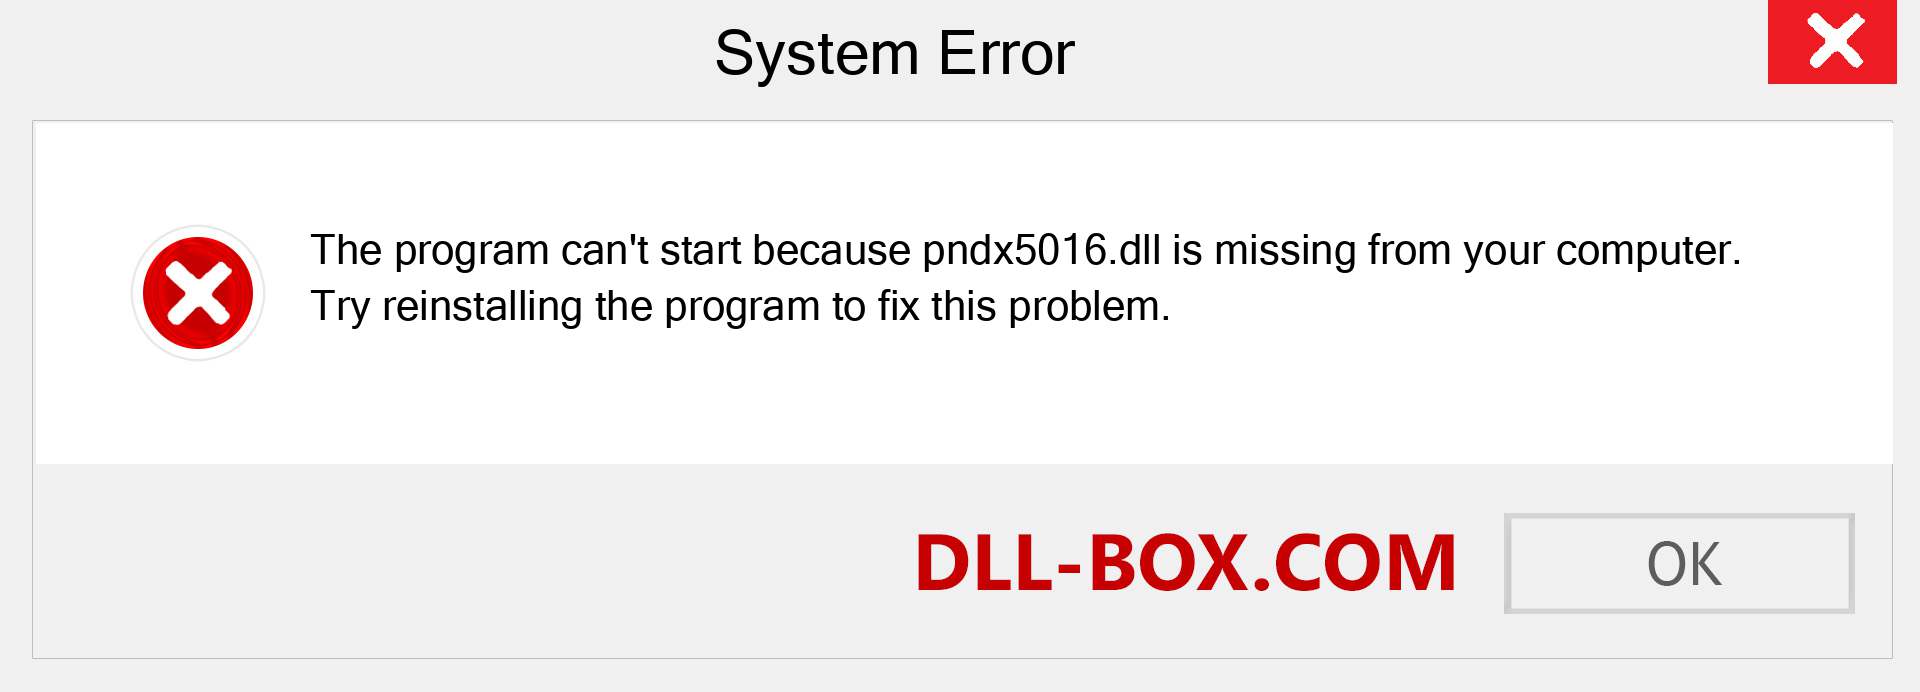  pndx5016.dll file is missing?. Download for Windows 7, 8, 10 - Fix  pndx5016 dll Missing Error on Windows, photos, images